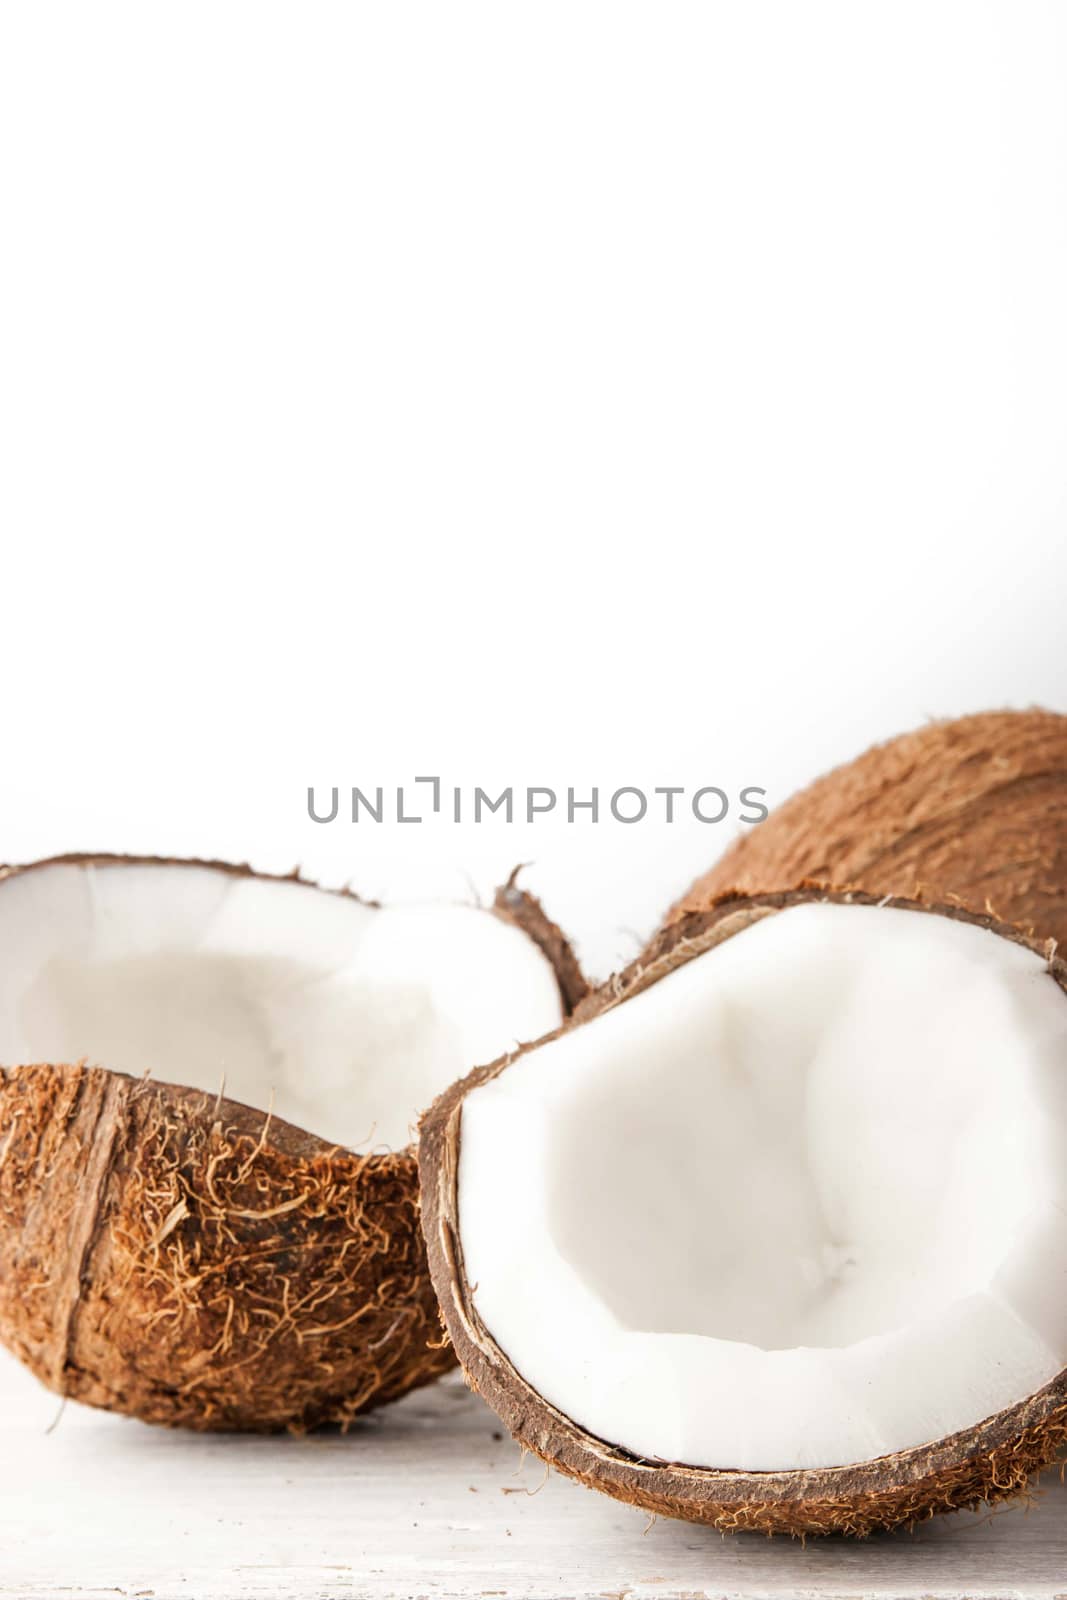 Coconuts  on the white background vertical